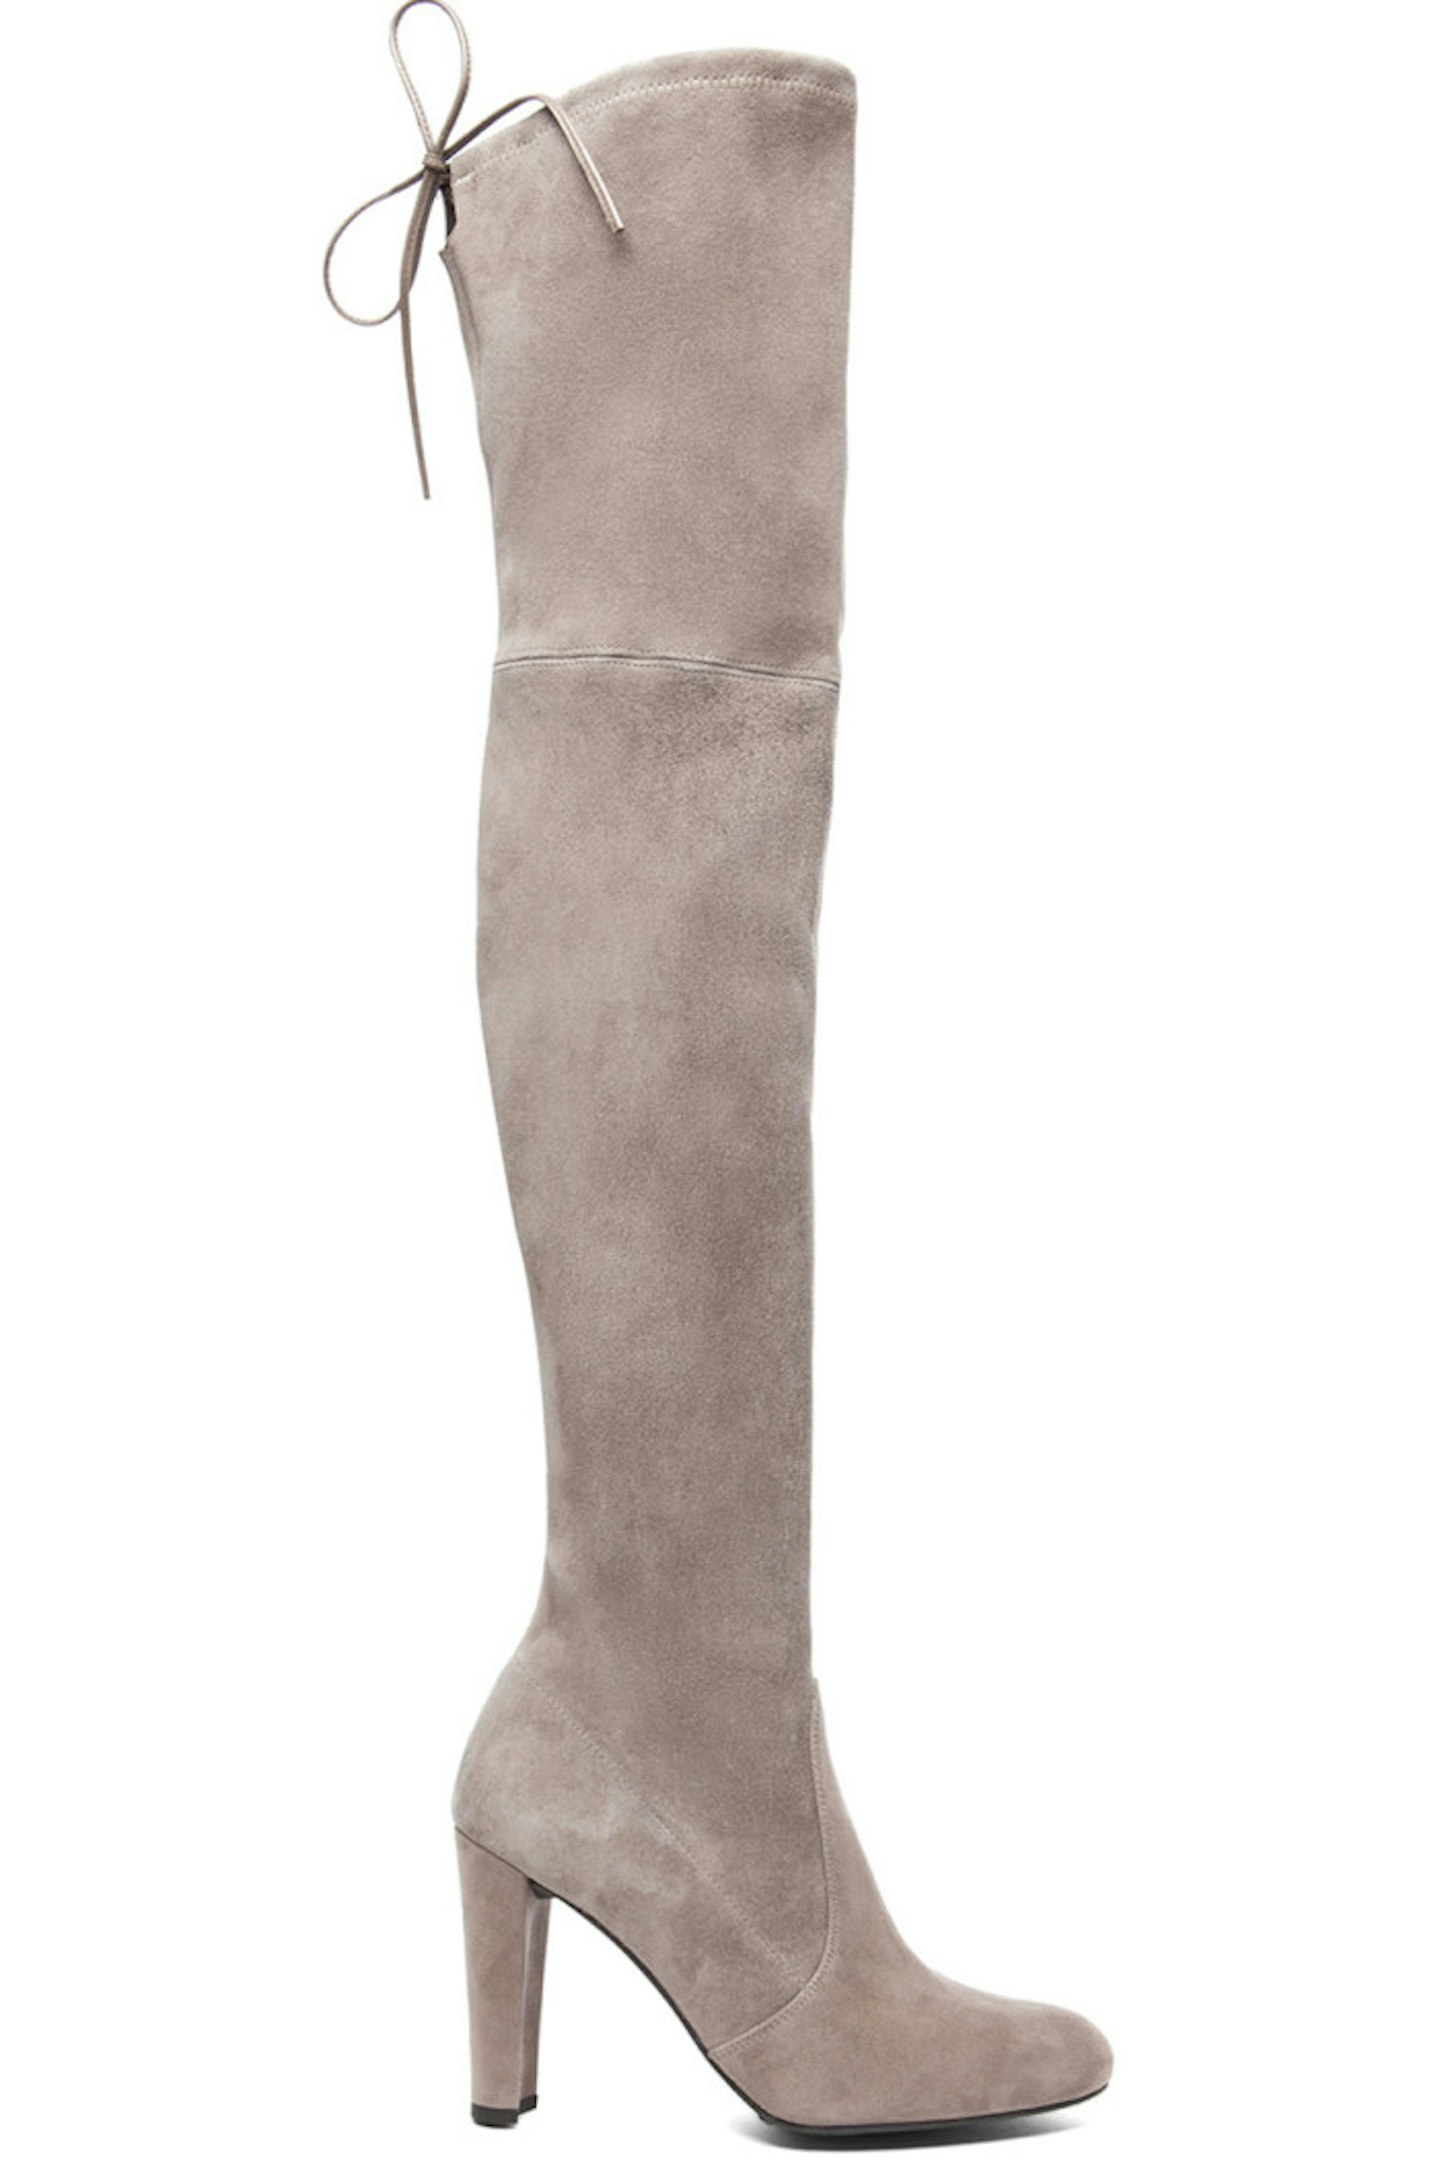 The classic Stuart Weitzman Highland boots have become iconic. We particularly love this beautiful neutral colour way.